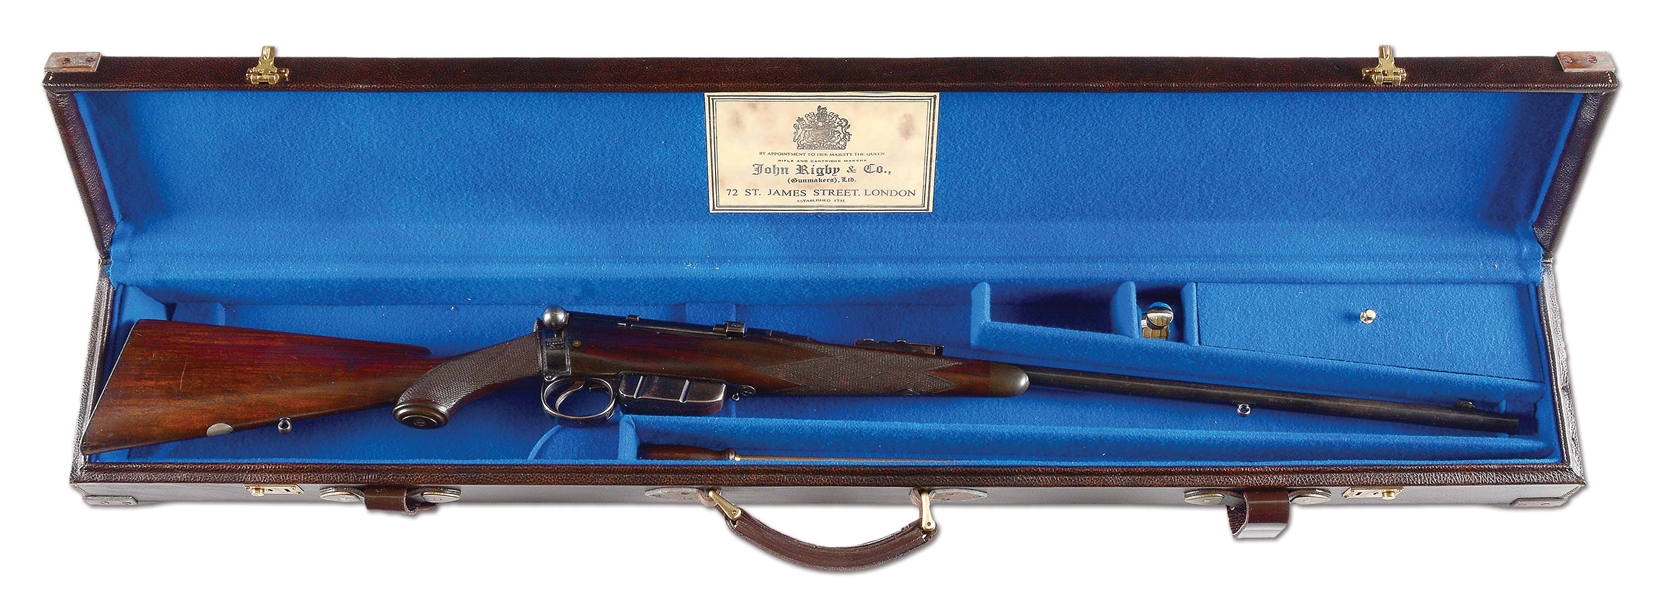 (C) JOHN RIGBY & CO. LEE-SPEED BOLT ACTION RIFLE.